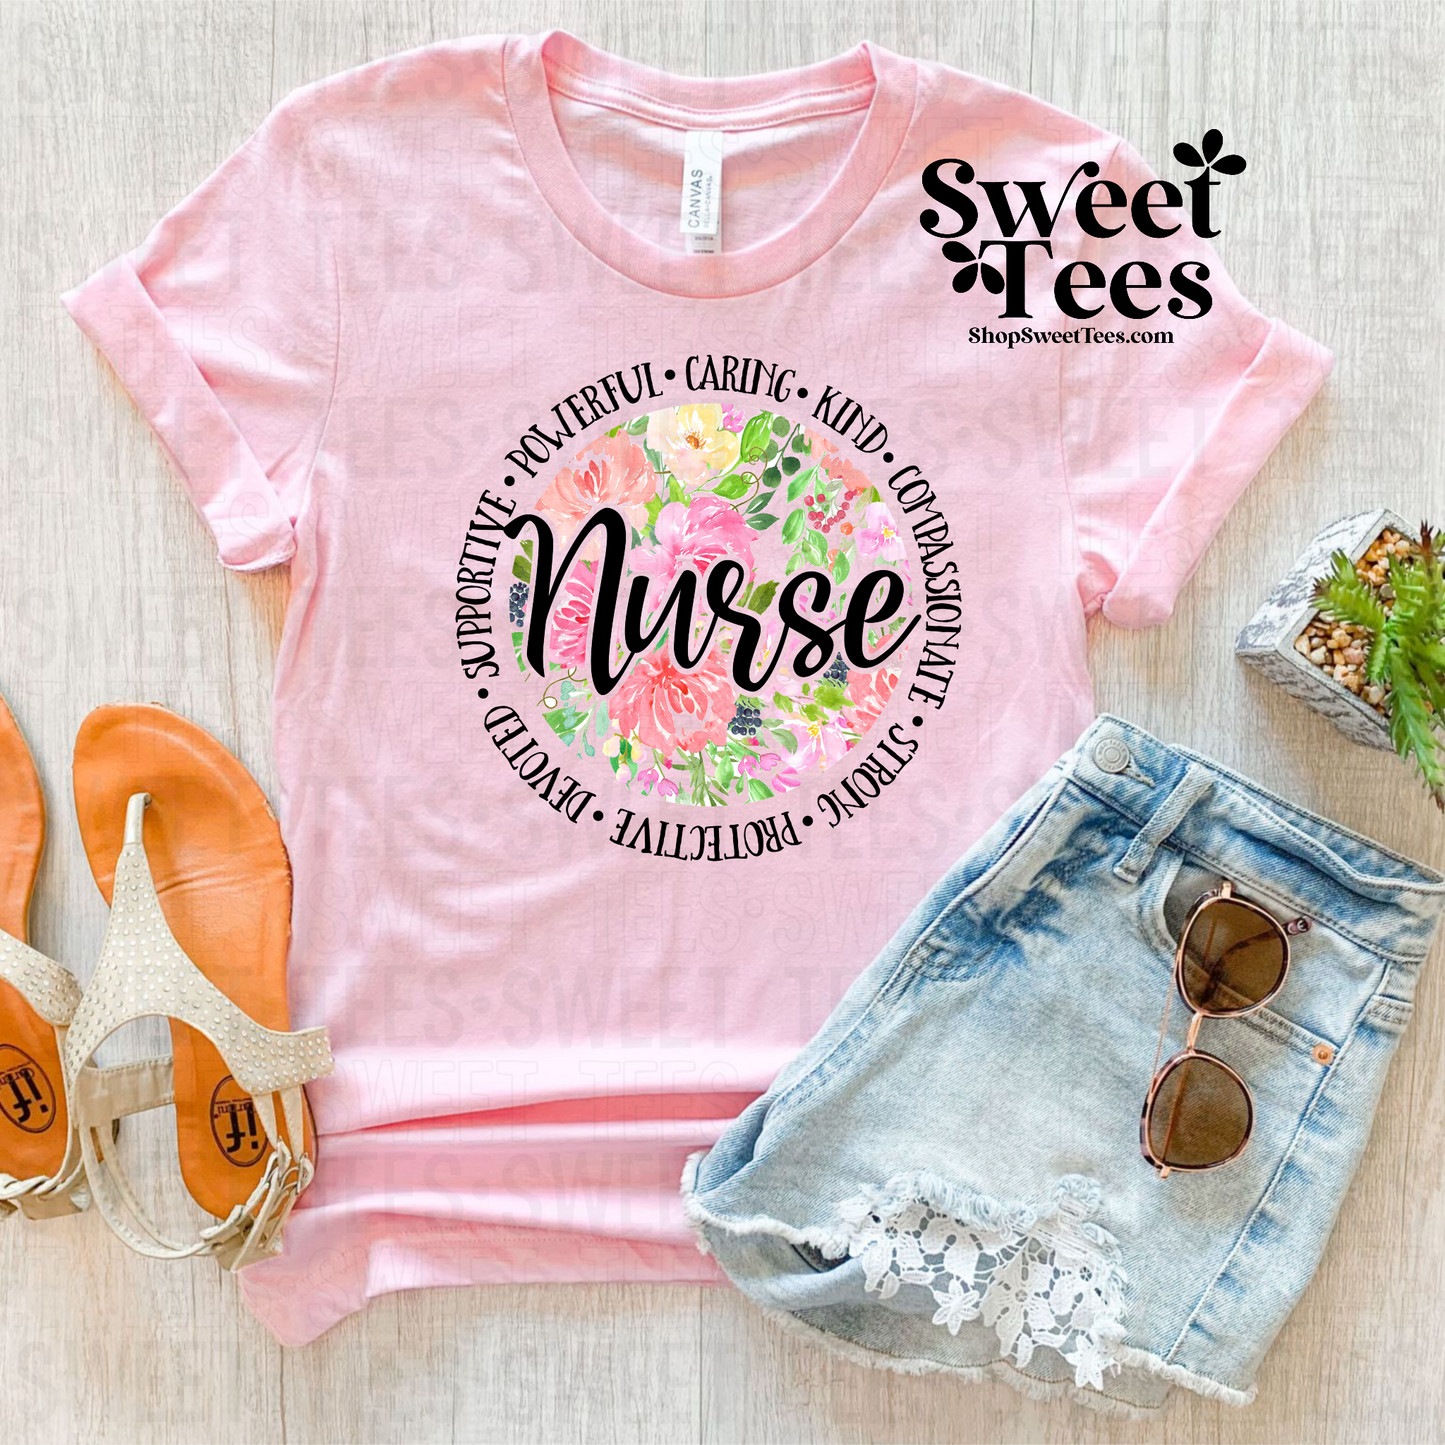 Everything About Being a Nurse tee